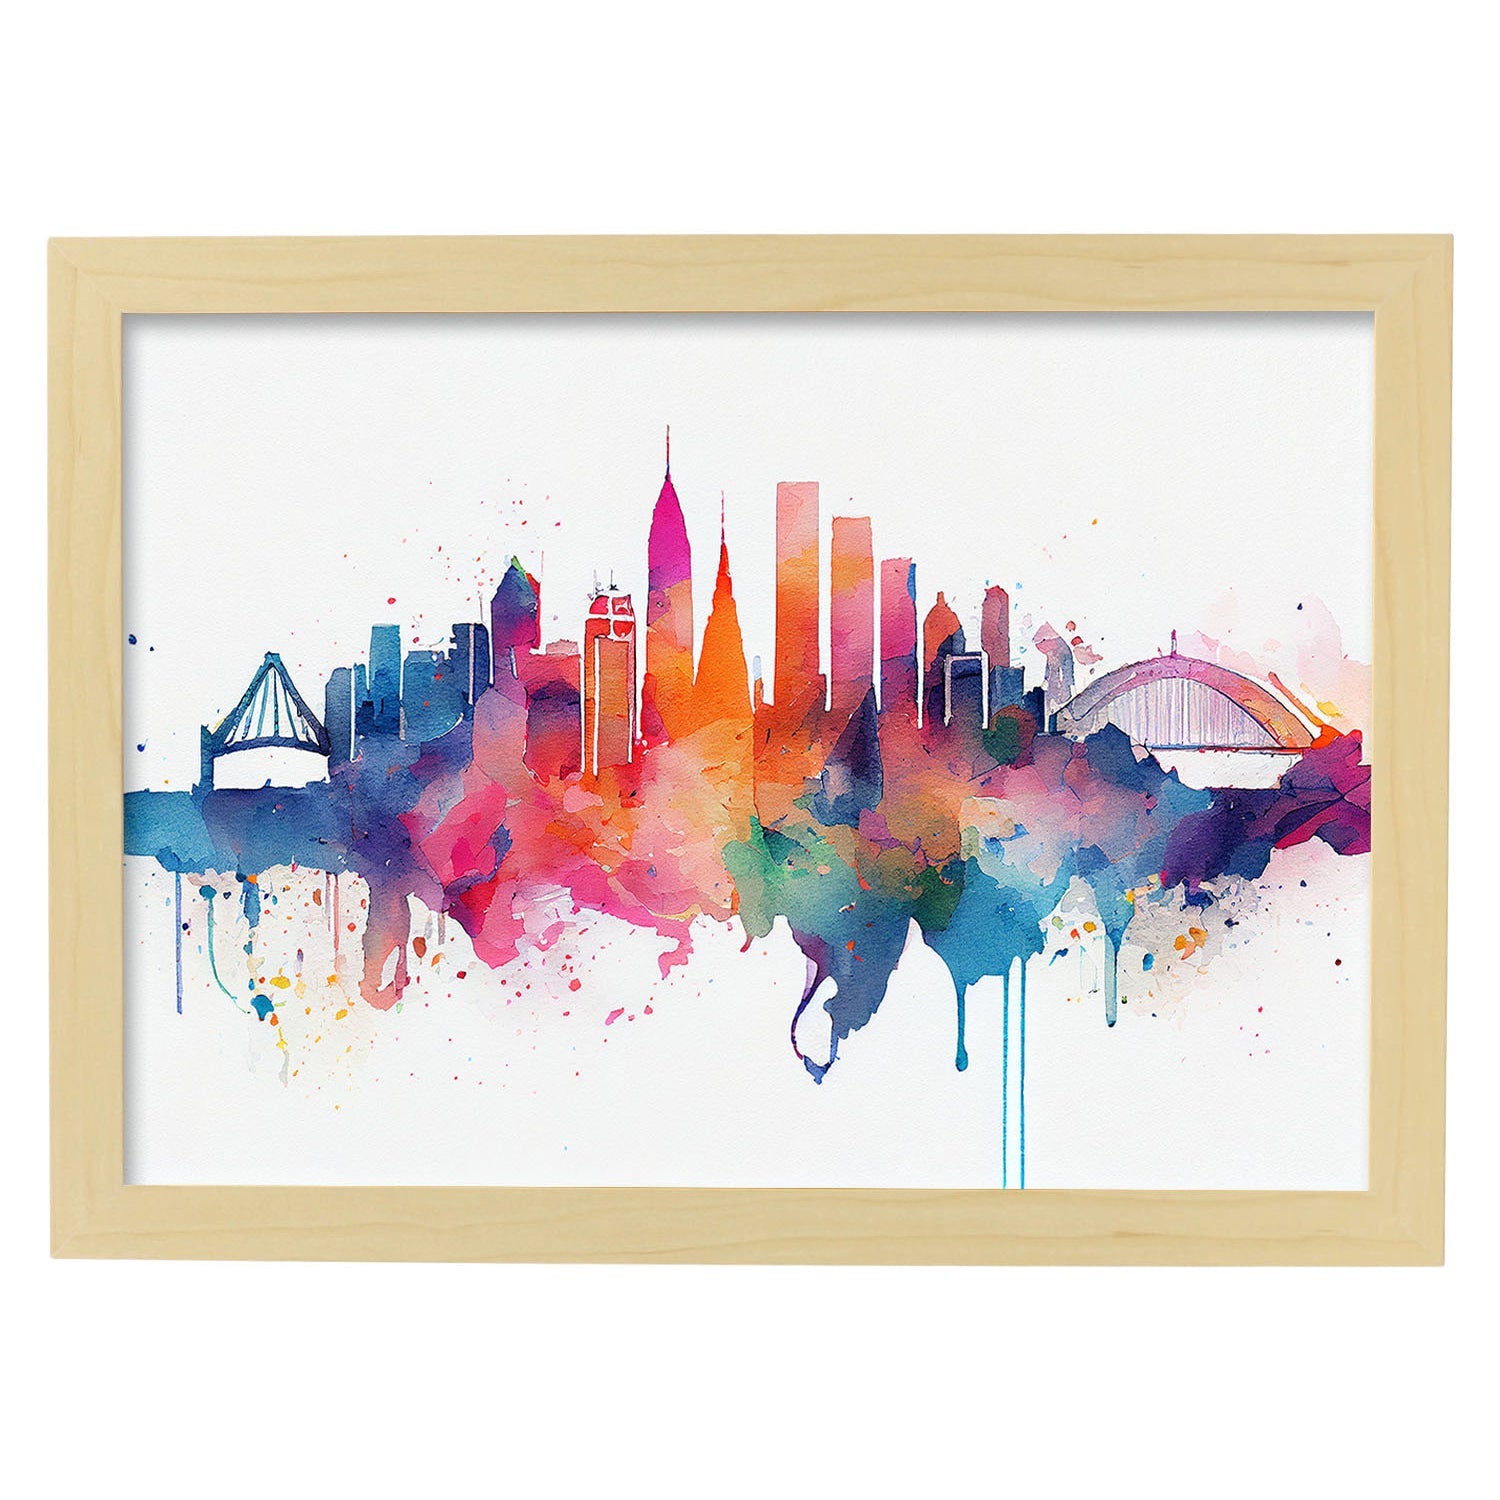 Nacnic watercolor of a skyline of the city of Sydney_1. Aesthetic Wall Art Prints for Bedroom or Living Room Design.-Artwork-Nacnic-A4-Marco Madera Clara-Nacnic Estudio SL